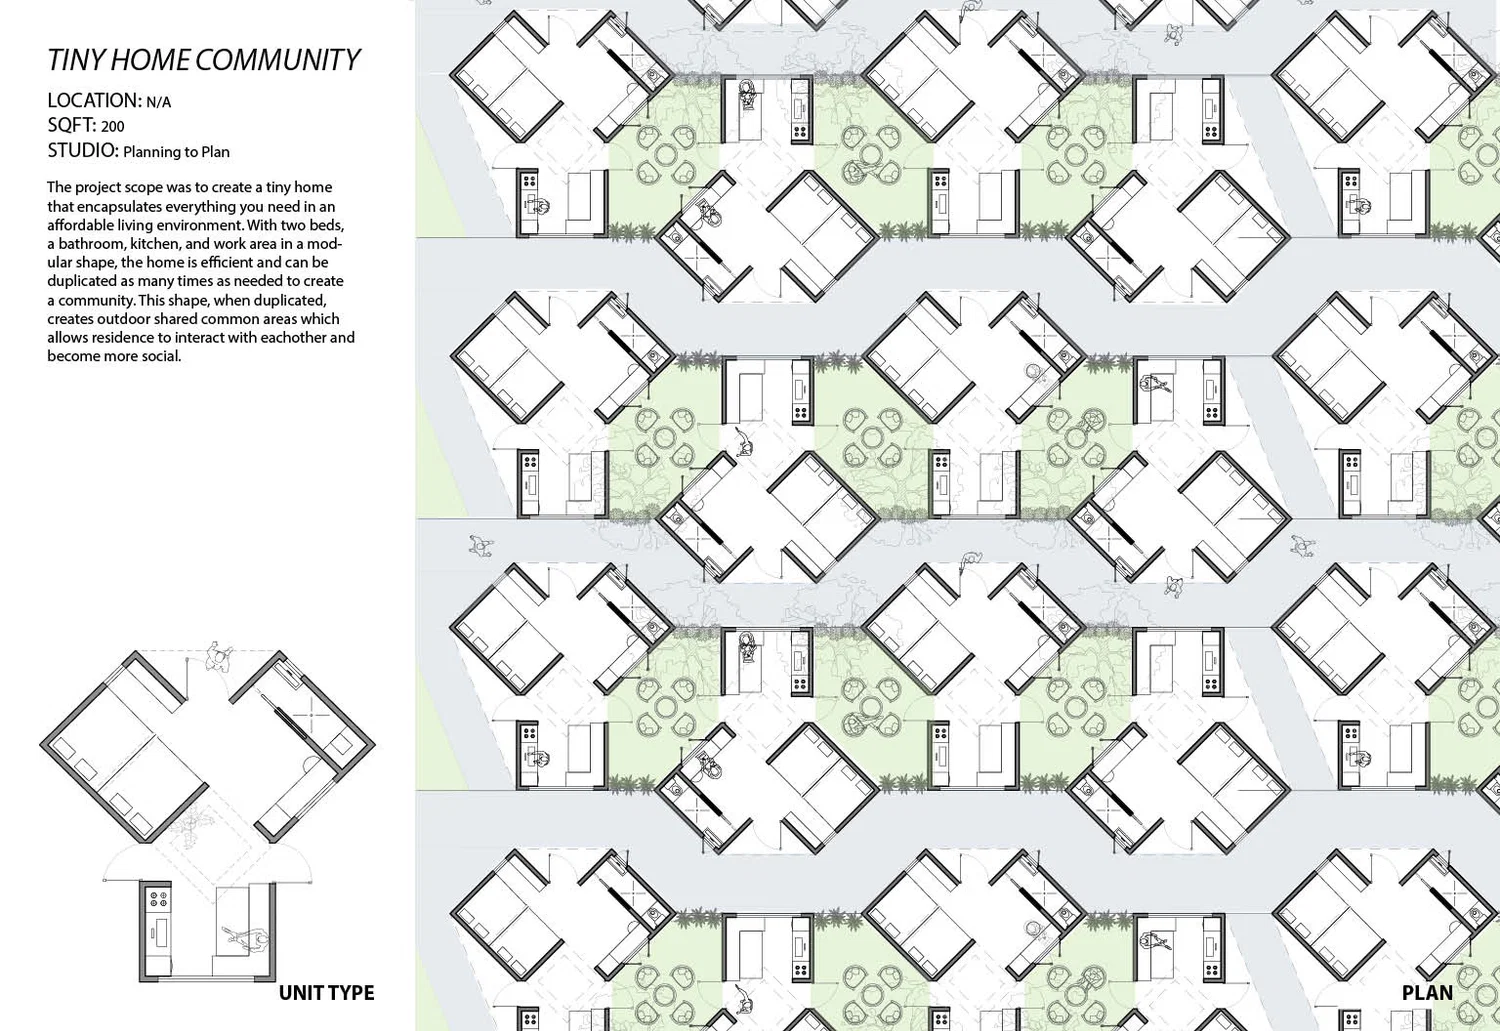 TINY HOUSE COMMUNITY- PLANNING TO PLAN